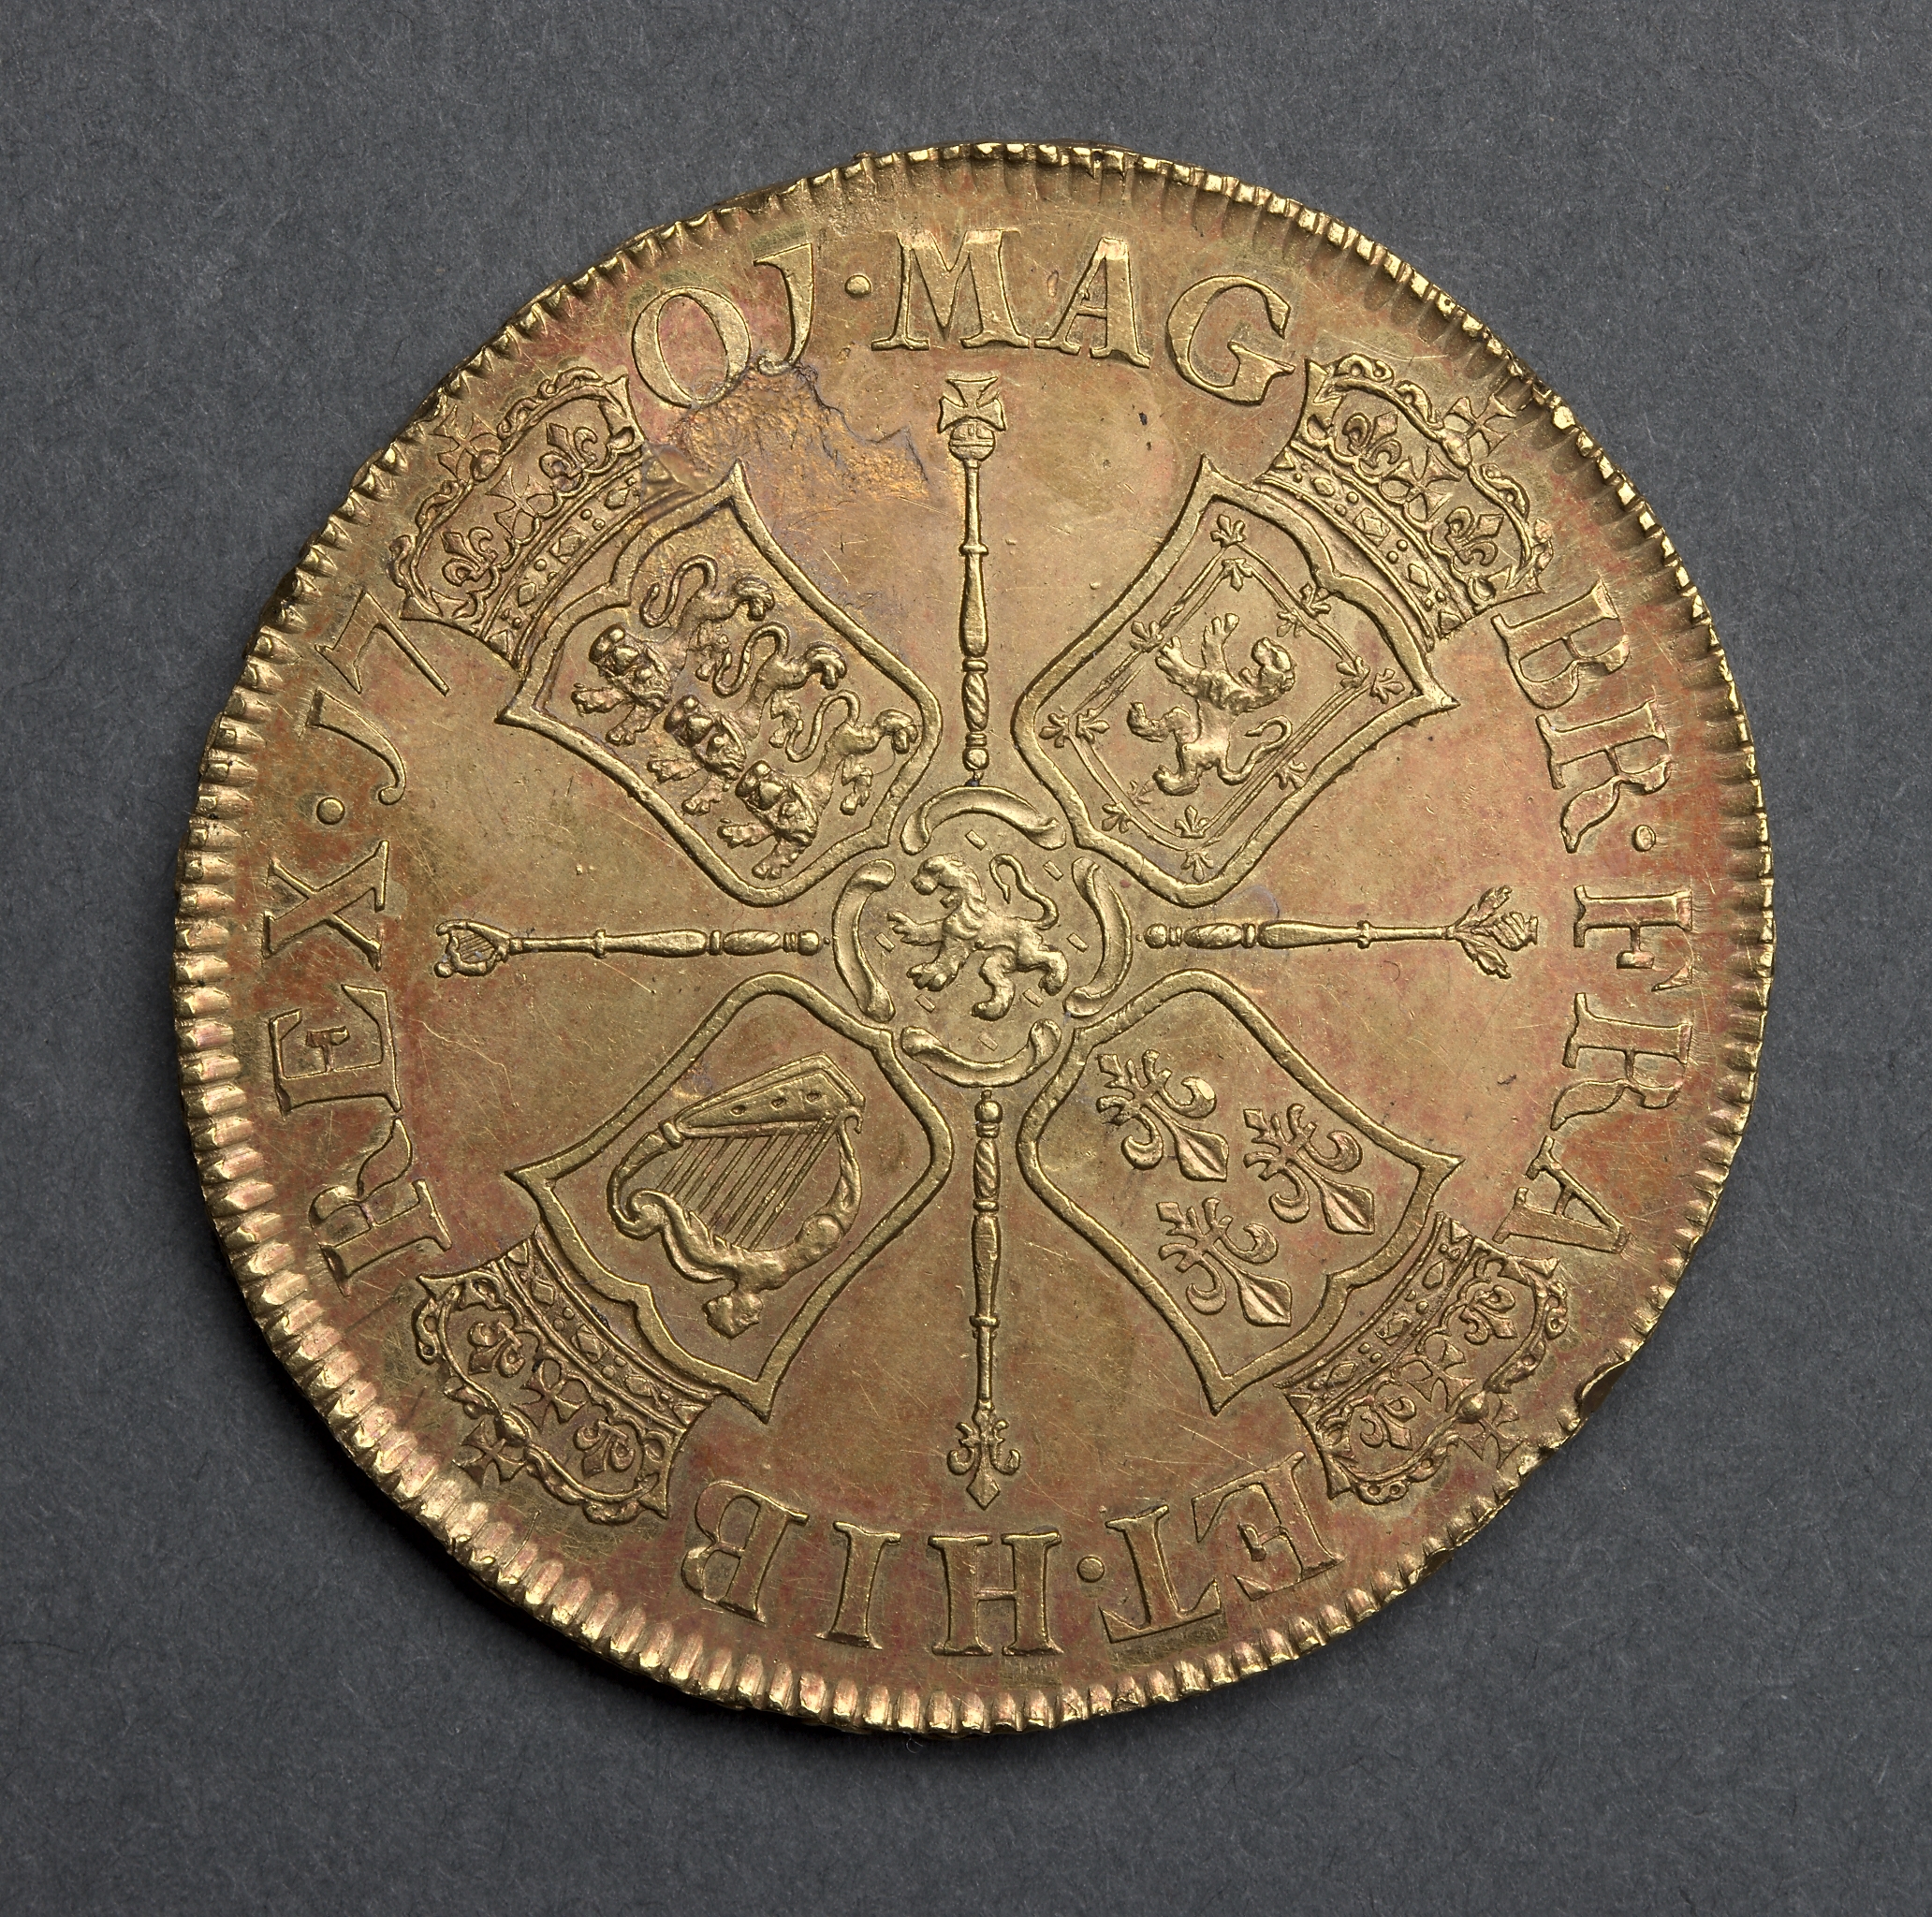 Five Guineas: Crowned Shields, Scepters, and Lion of Nassau (reverse)